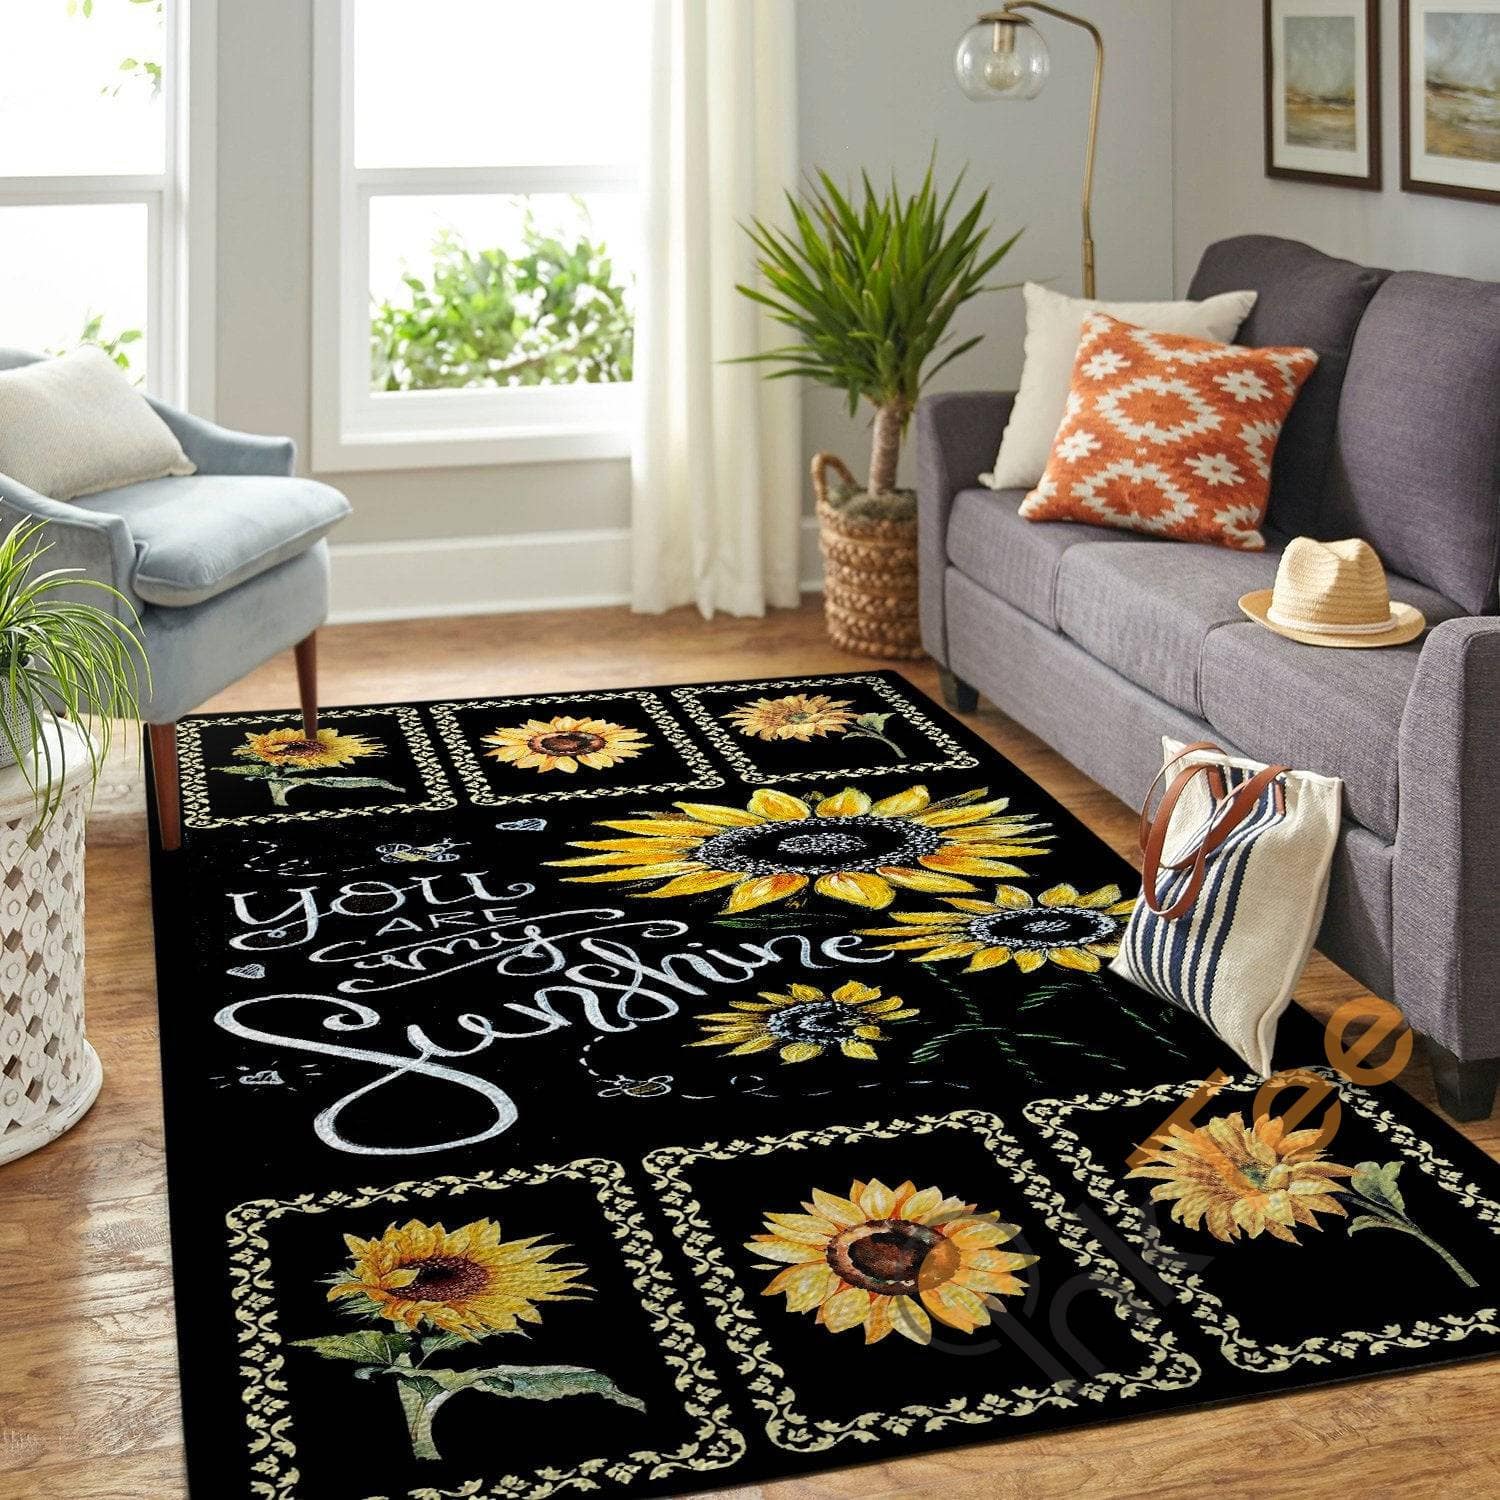 You Are My Sunshine Hippie Soft Living Room Bedroom Carpet Highlight For Home Beautiful Gift Her Rug